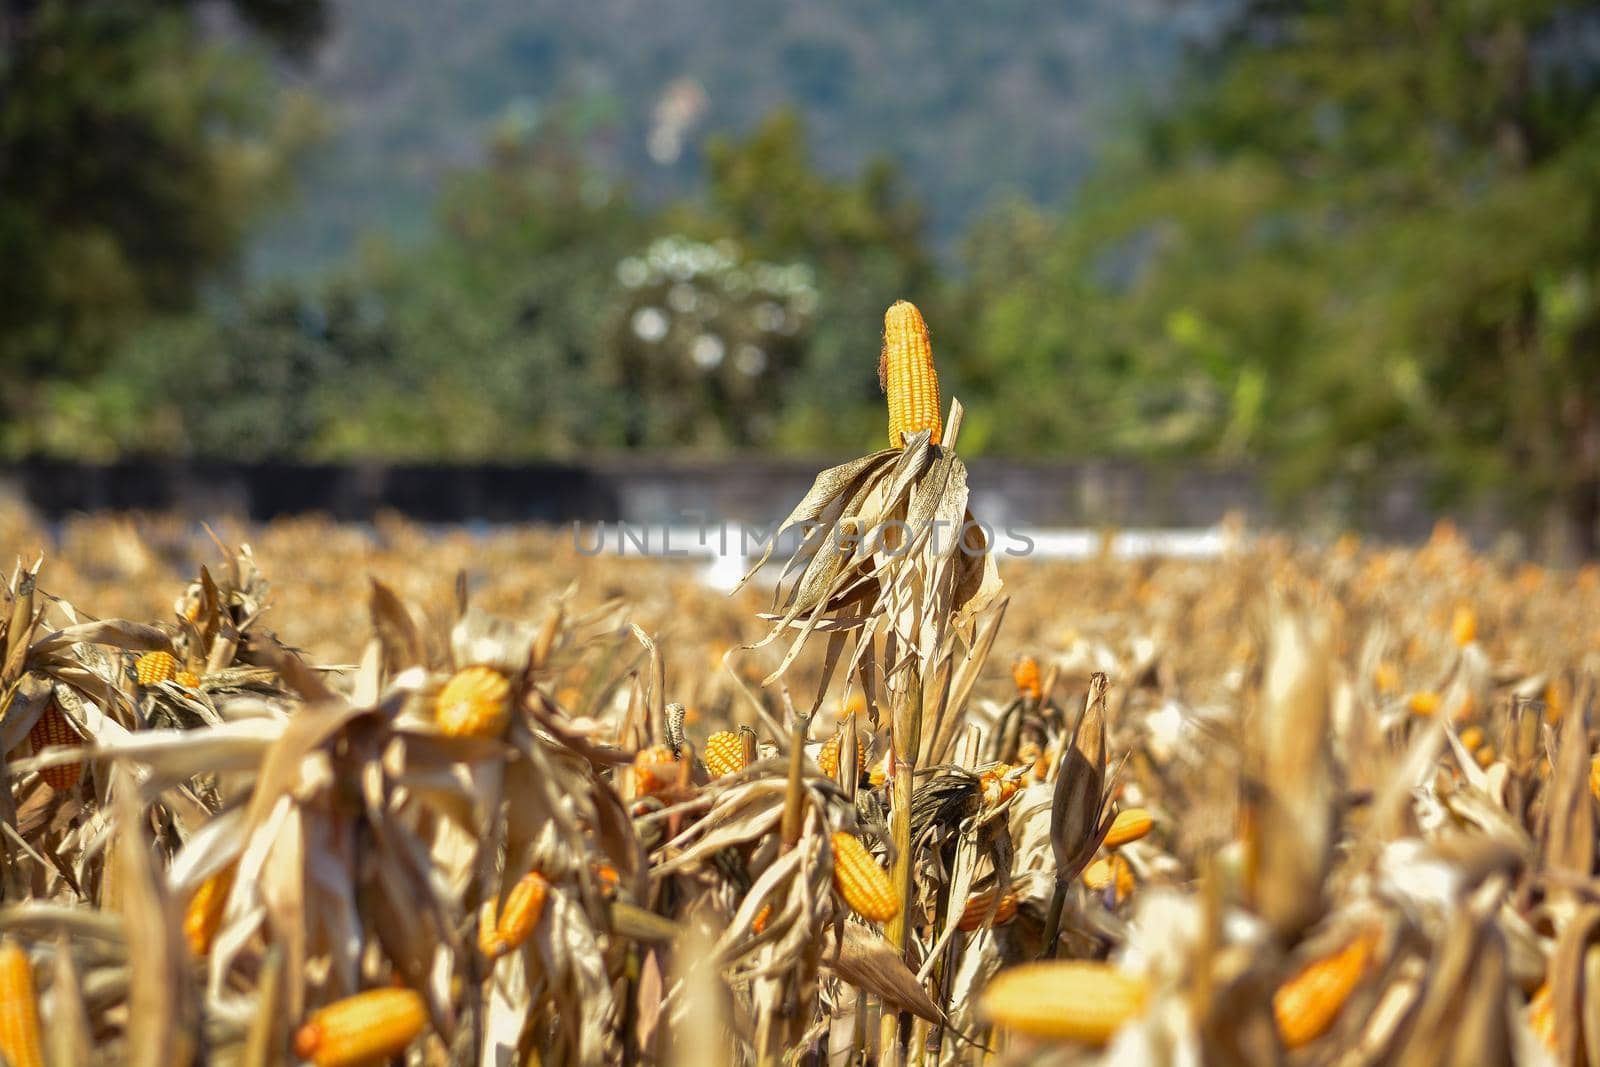 Closeup of Cob Corn in Field or Garden. by thampapon